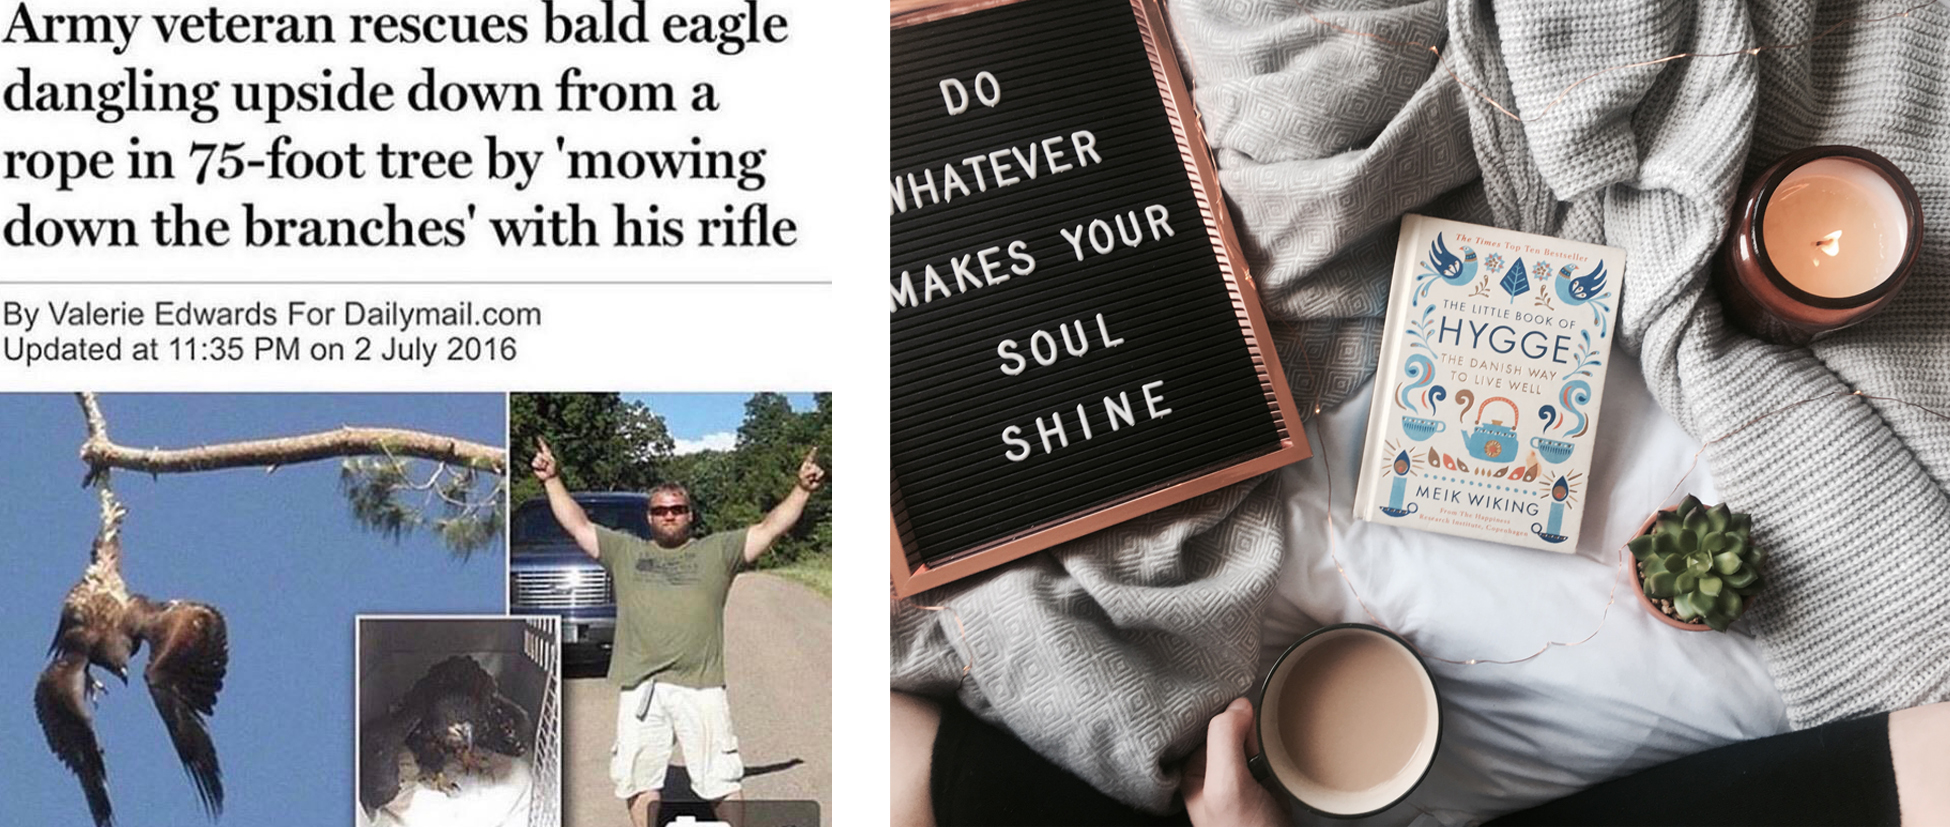 On the left: screenshot of Daily Mail article about an American Army veteran who “rescue[d] bald eagle dangling upside down from a rope in 75-foot tree by ‘mowing down the branches’ with his rifle”; on the right: photo of a book about hygge alongside a candle, coffee mug, a sign that reads “Do whatever makes your soul shine.”